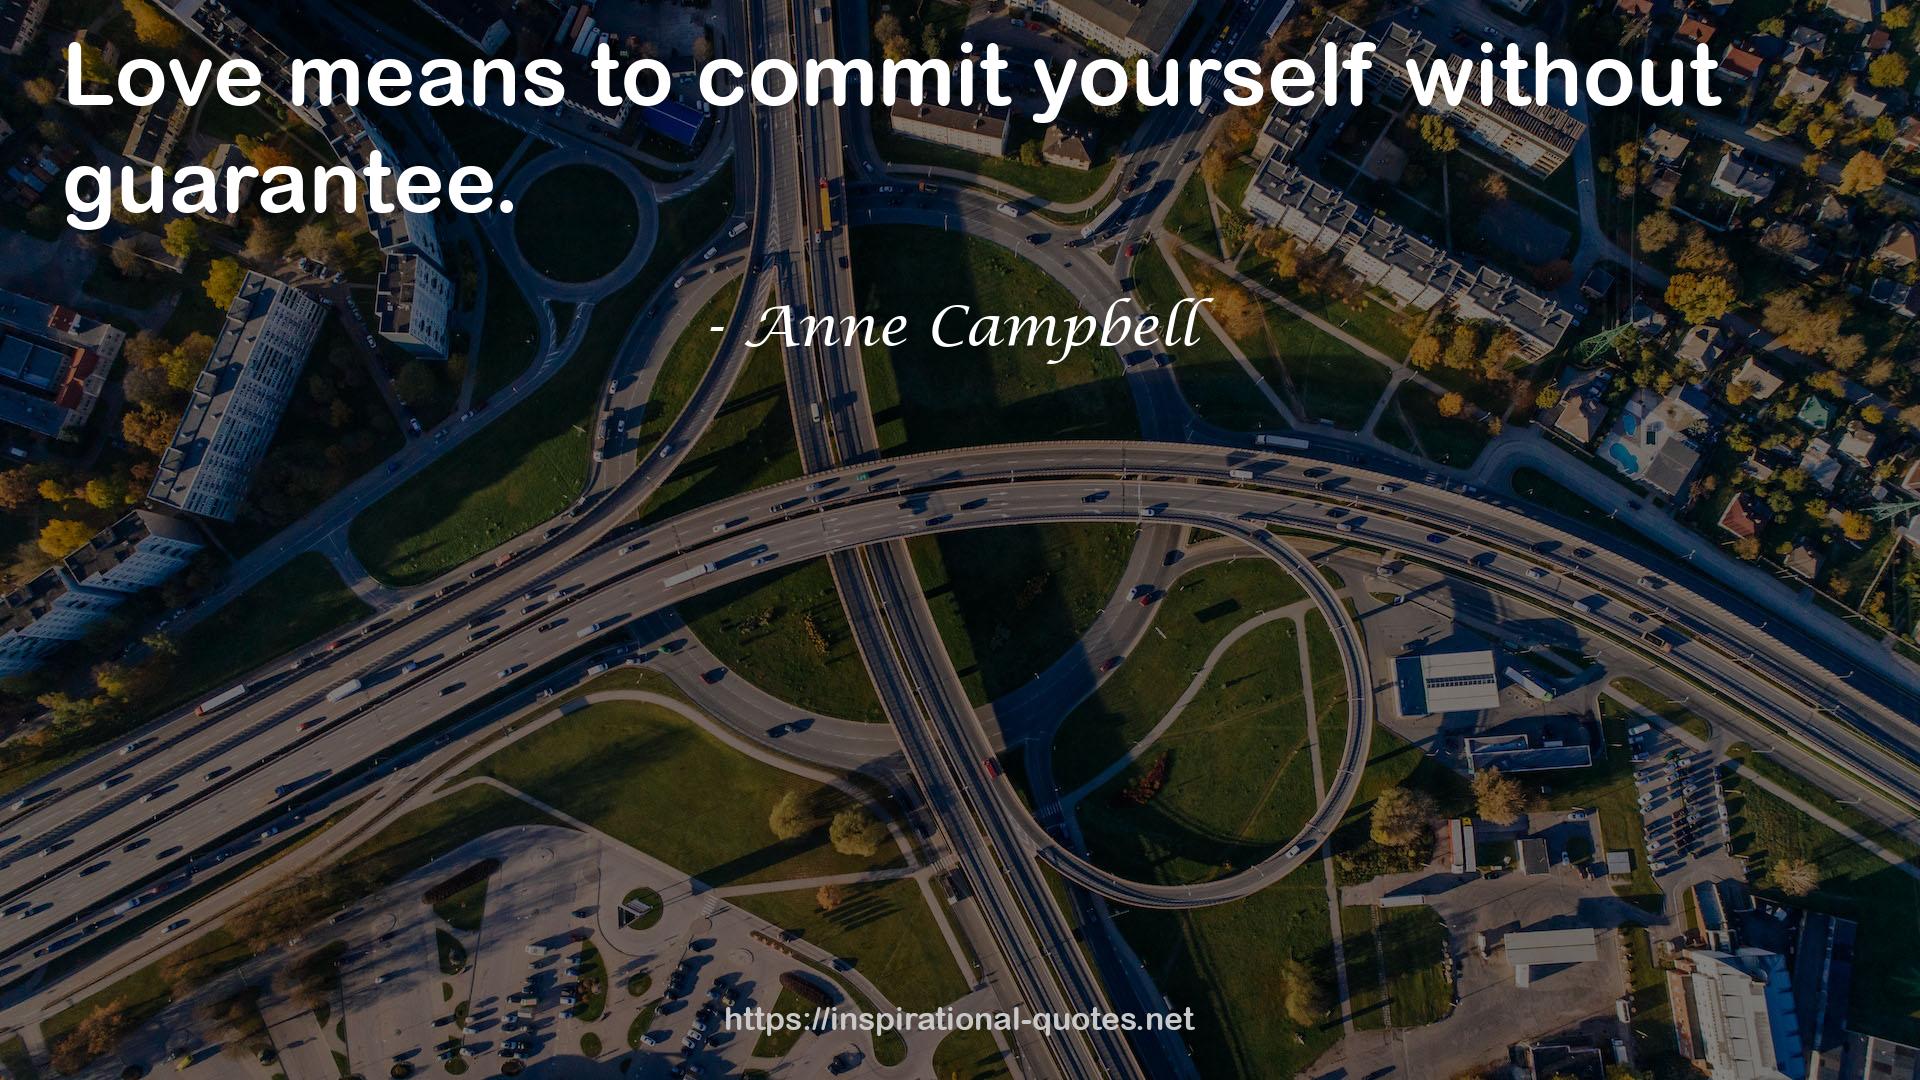 Anne Campbell QUOTES